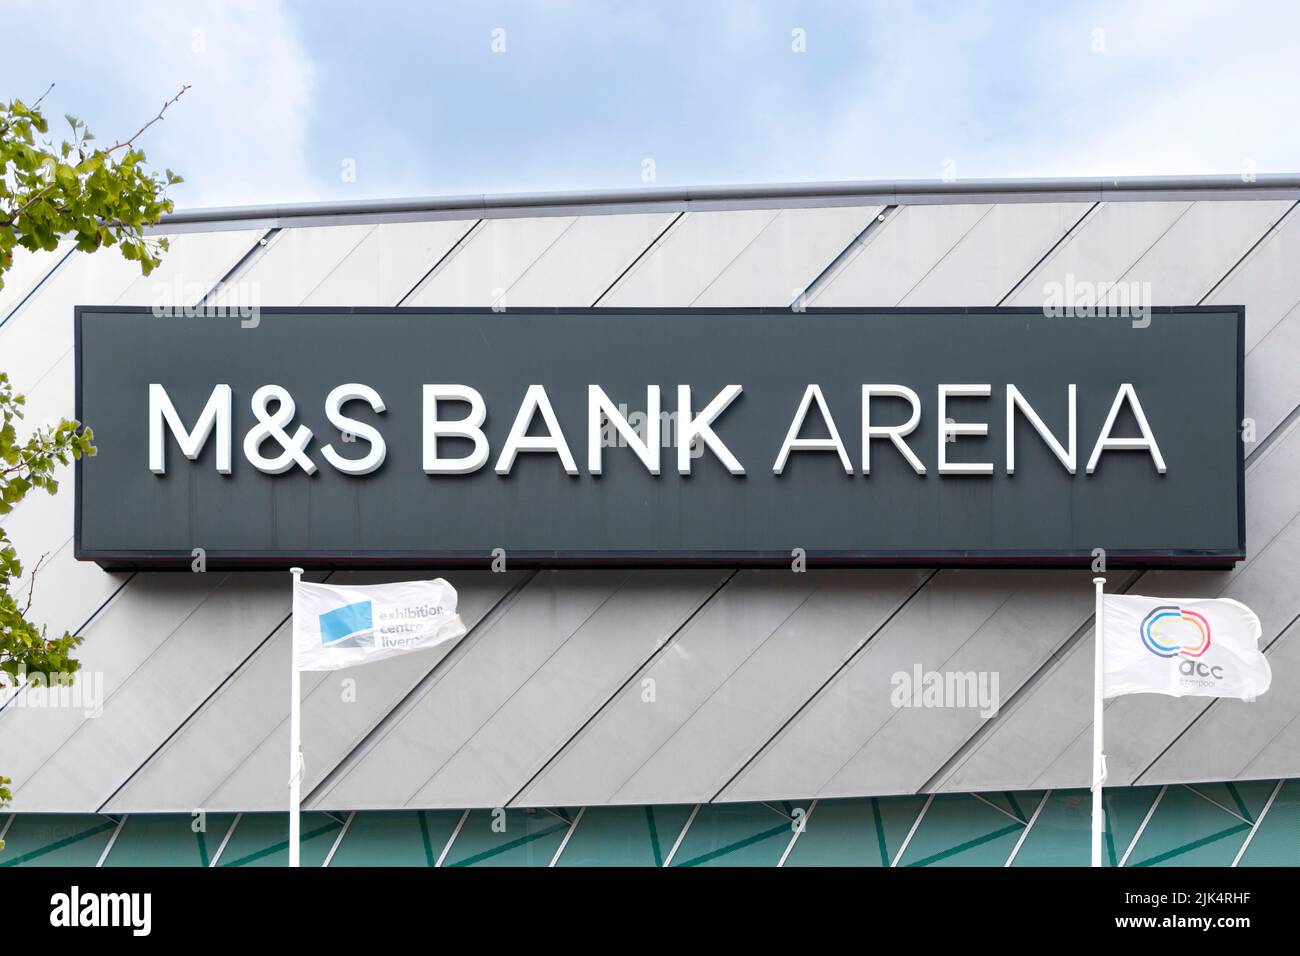 isolated M&S bank arena sign in liverpool  logo  s Stock Photo